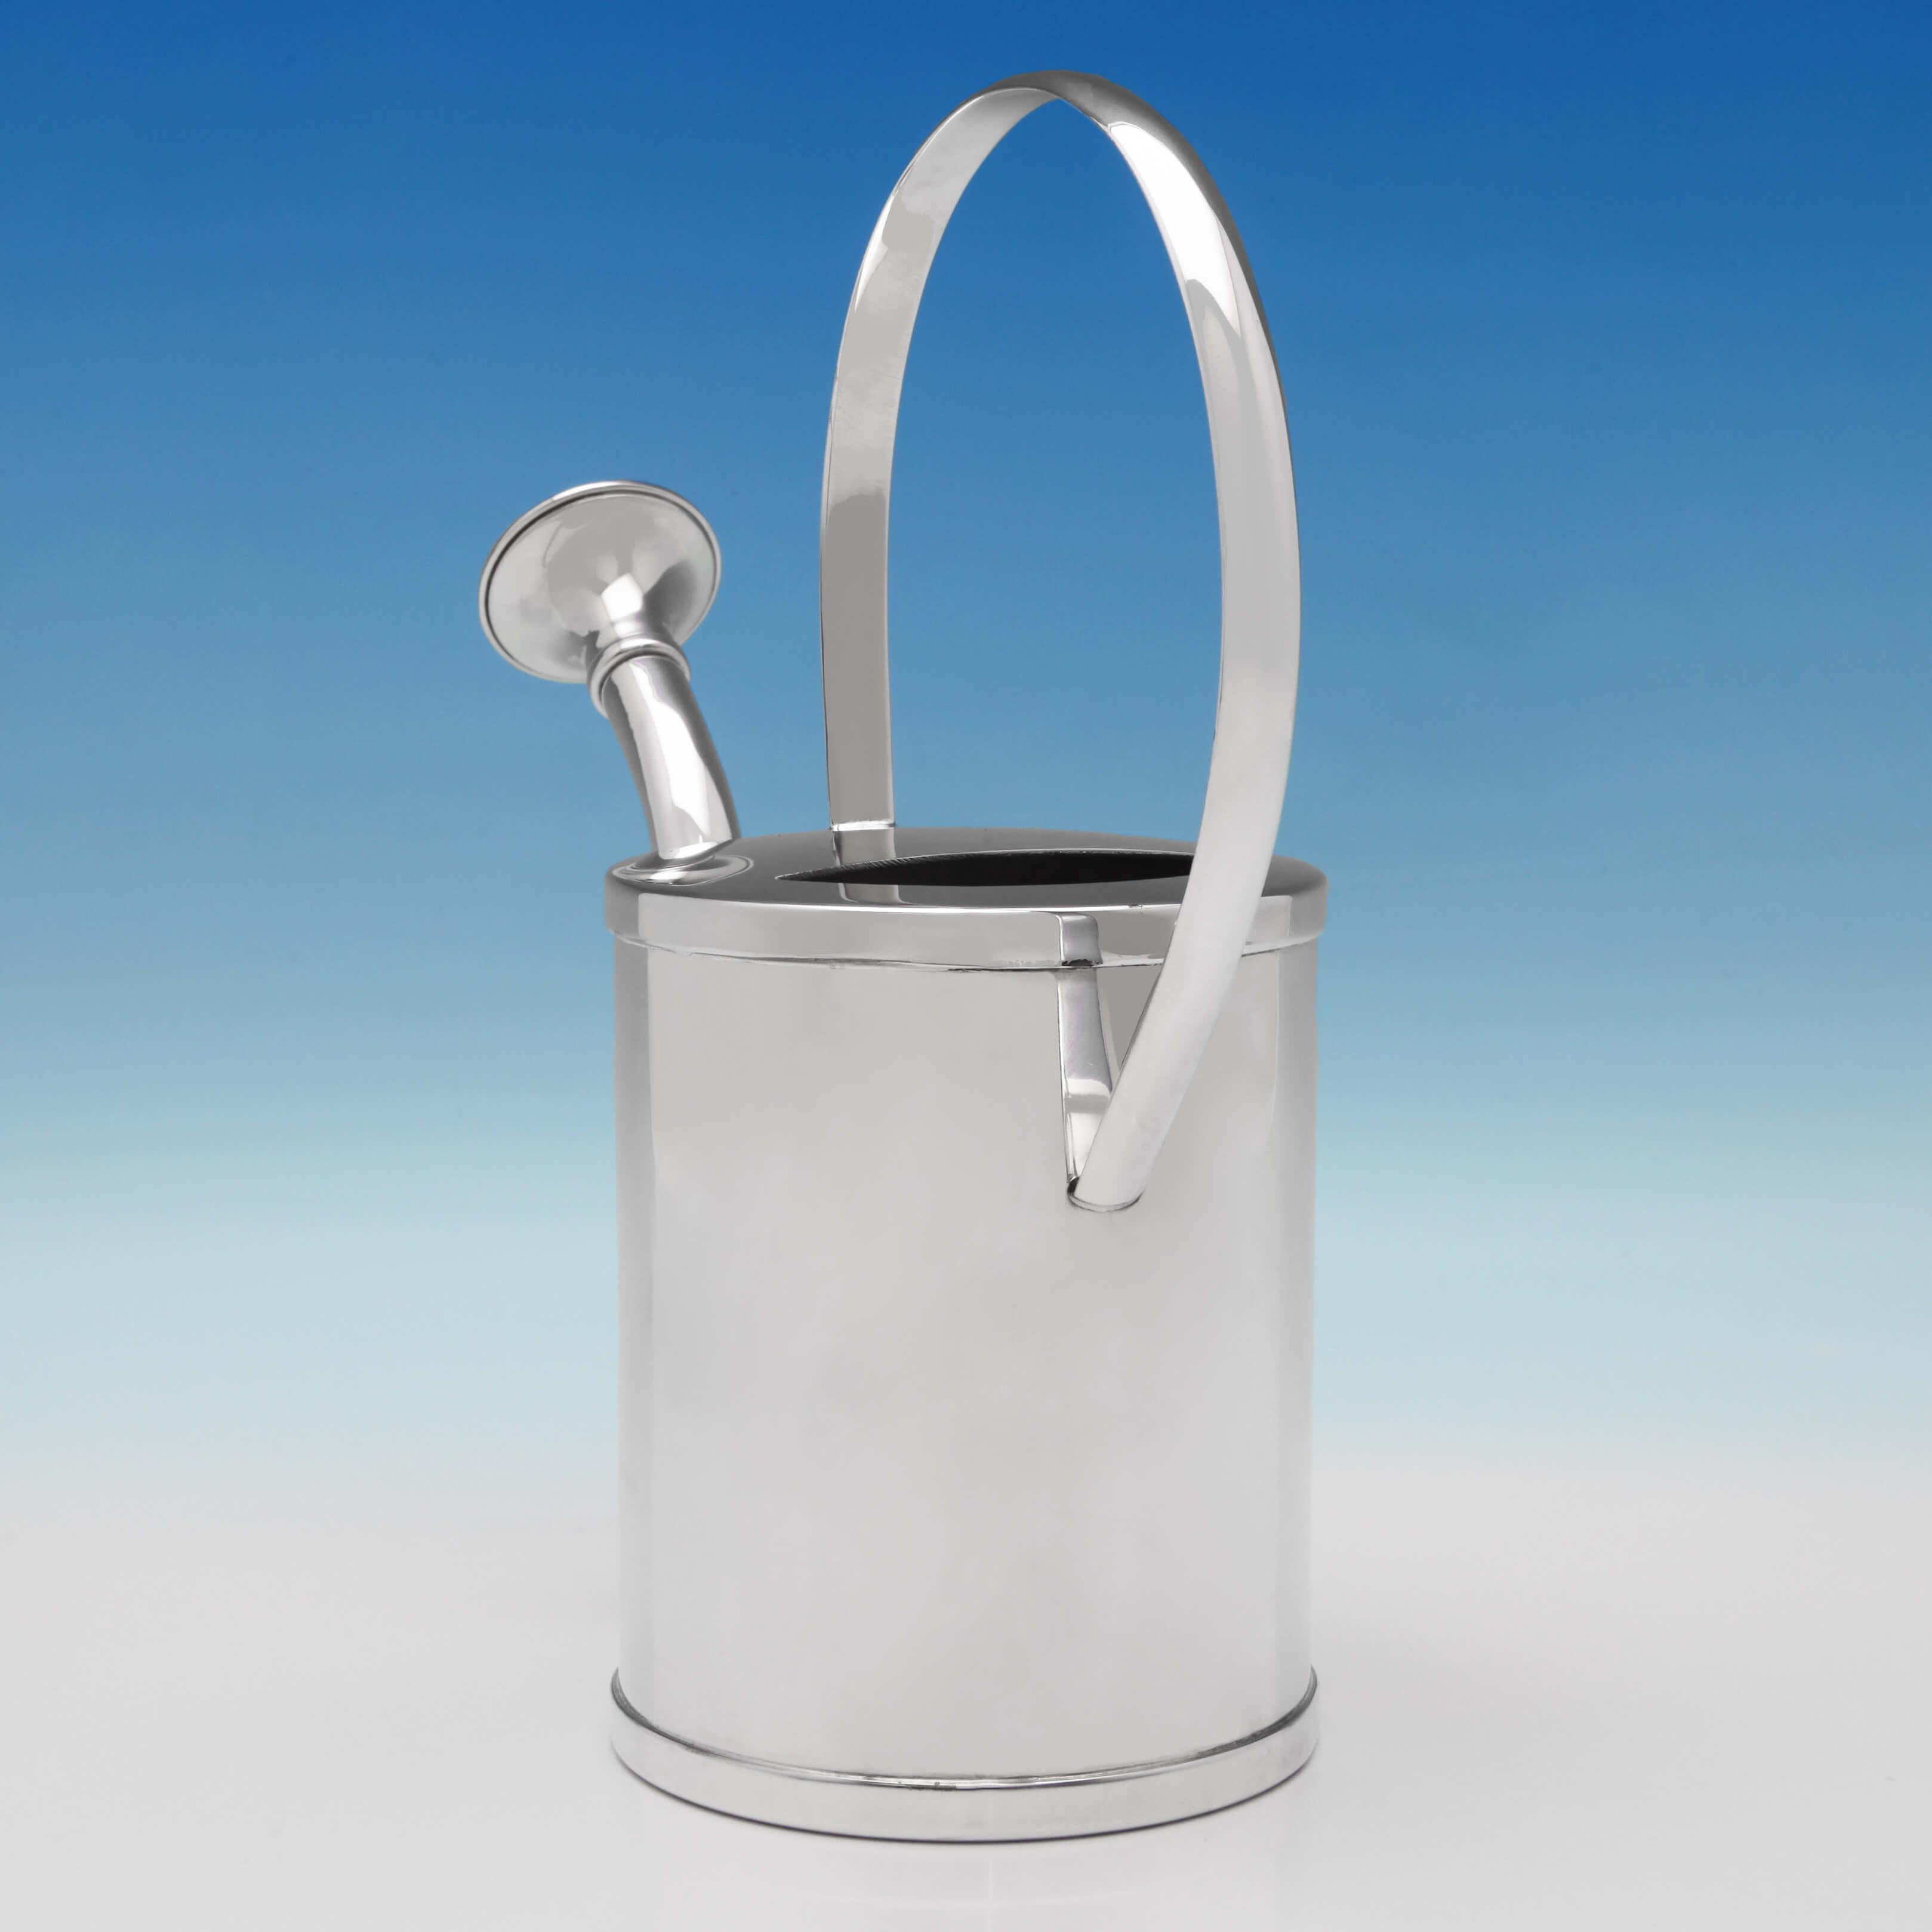 Made in London circa 1950 by Asprey & Co. Ltd., this fun and desirable silver plate watering can is functional as well as beautiful. The watering can measures: 10